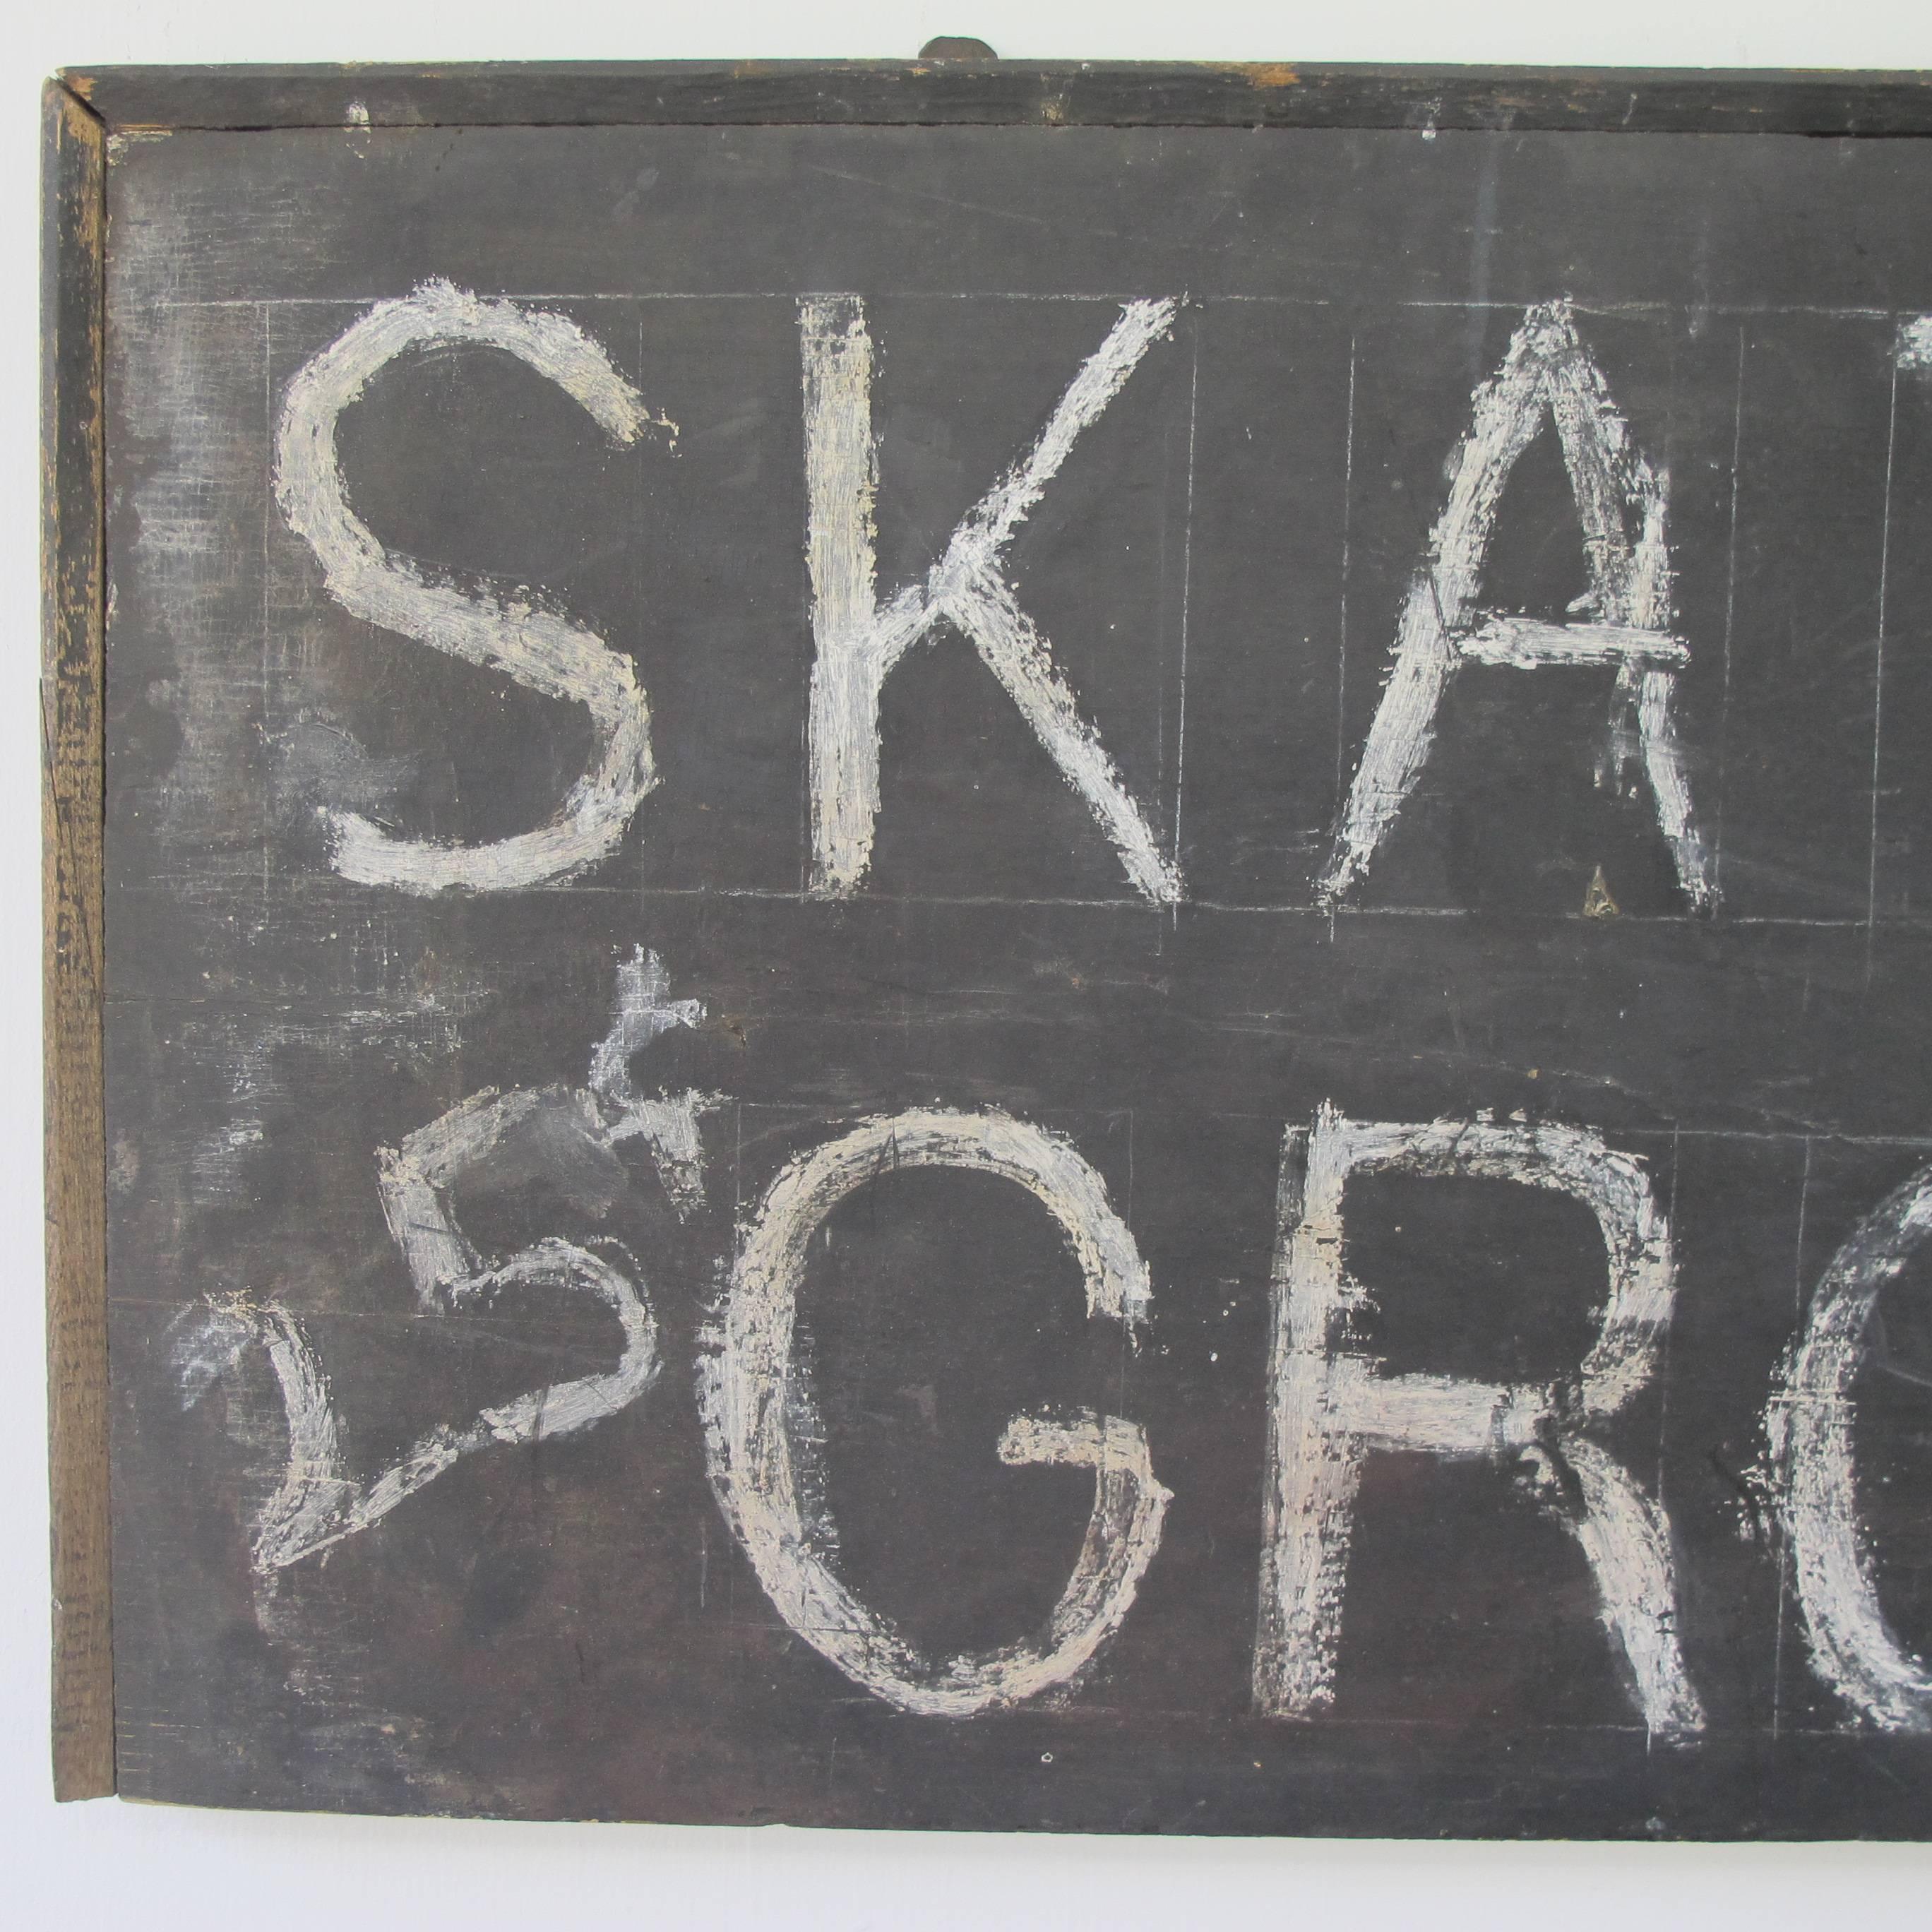 Graphic old hand-painted sign skates ground 25 cents. The sign retains two old metal tabs along top edge that were used to hang it.
                    